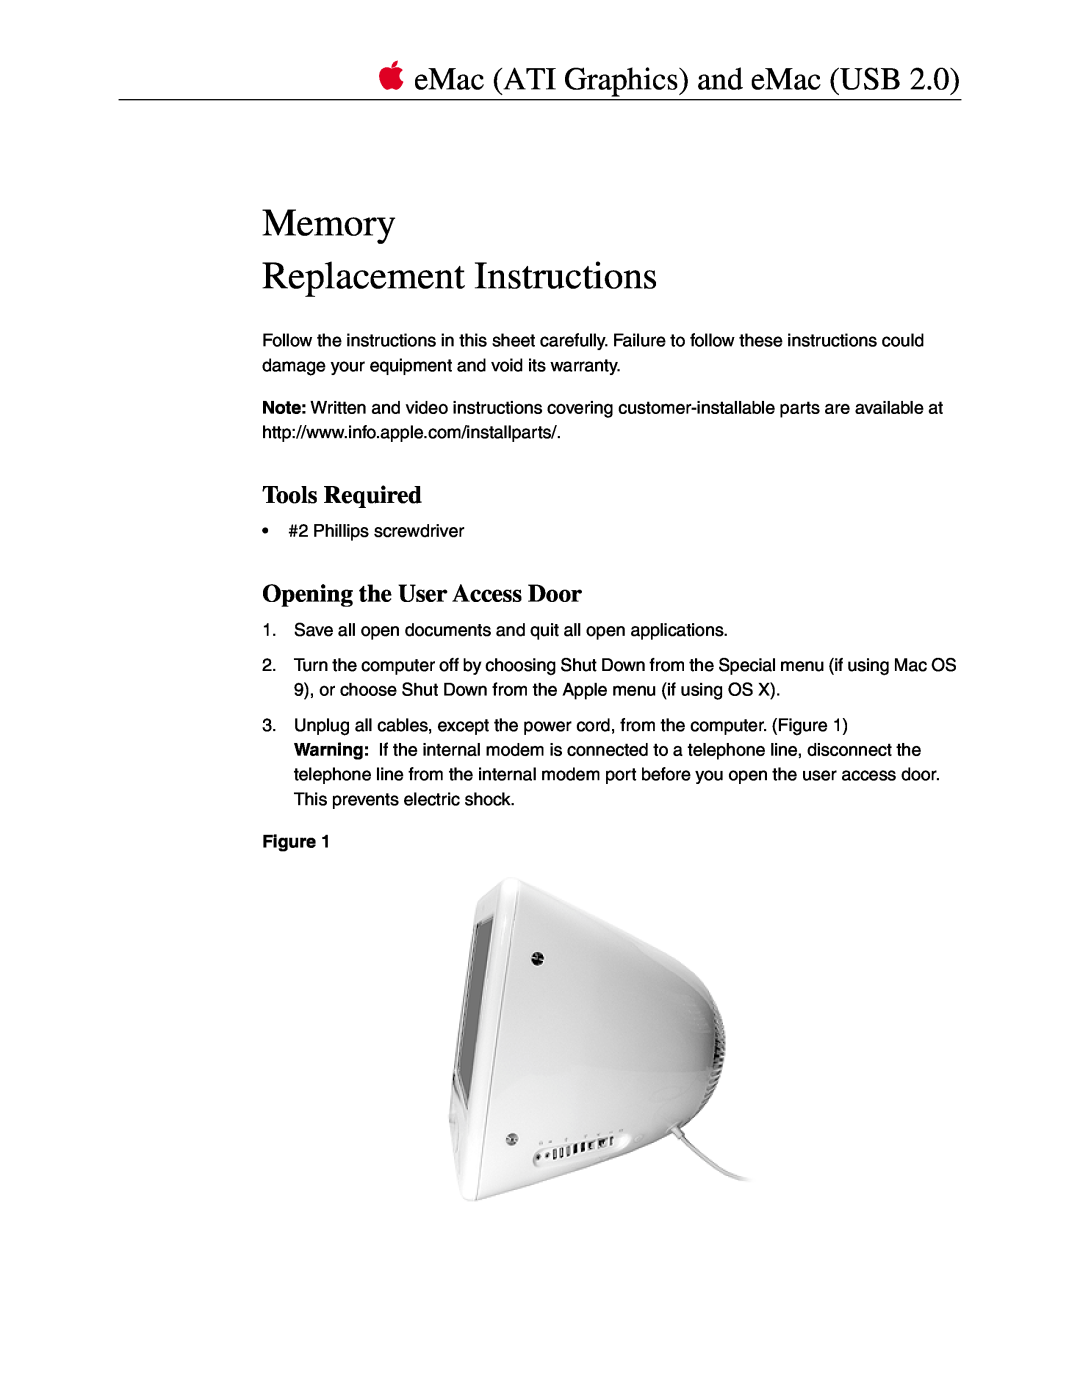 Apple ATI Graphics, USB 2.0 warranty Tools Required, Opening the User Access Door, Memory Replacement Instructions 